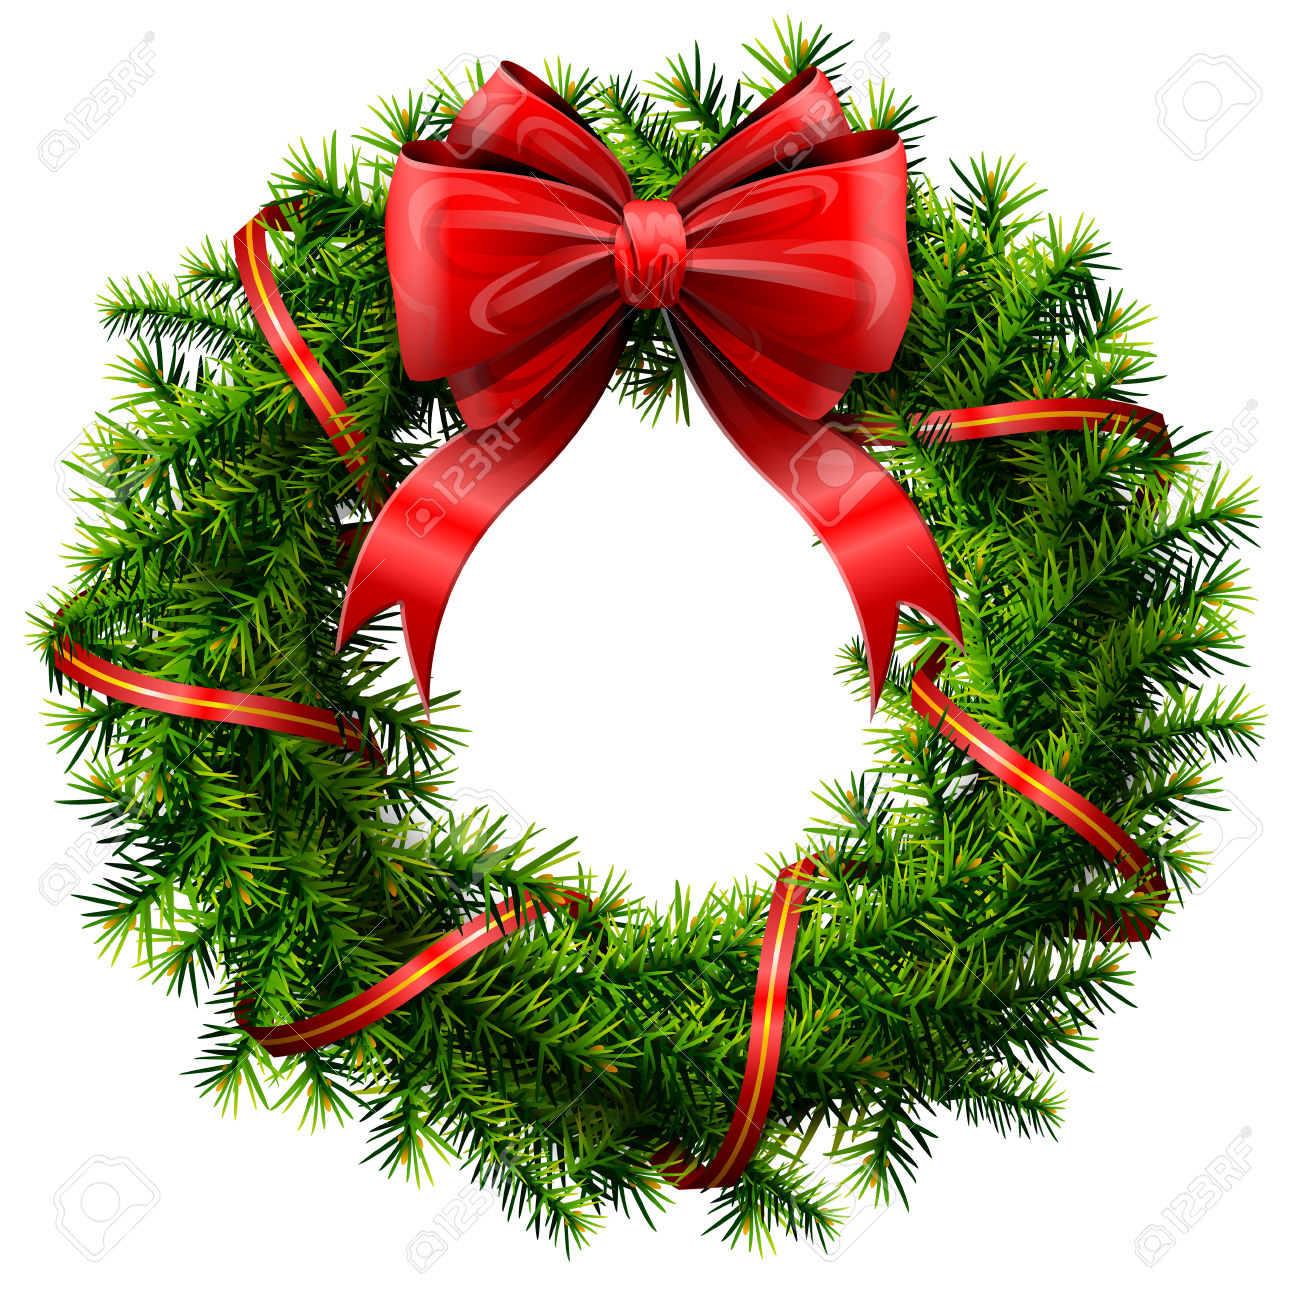 Wreath clipart #17, Download drawings